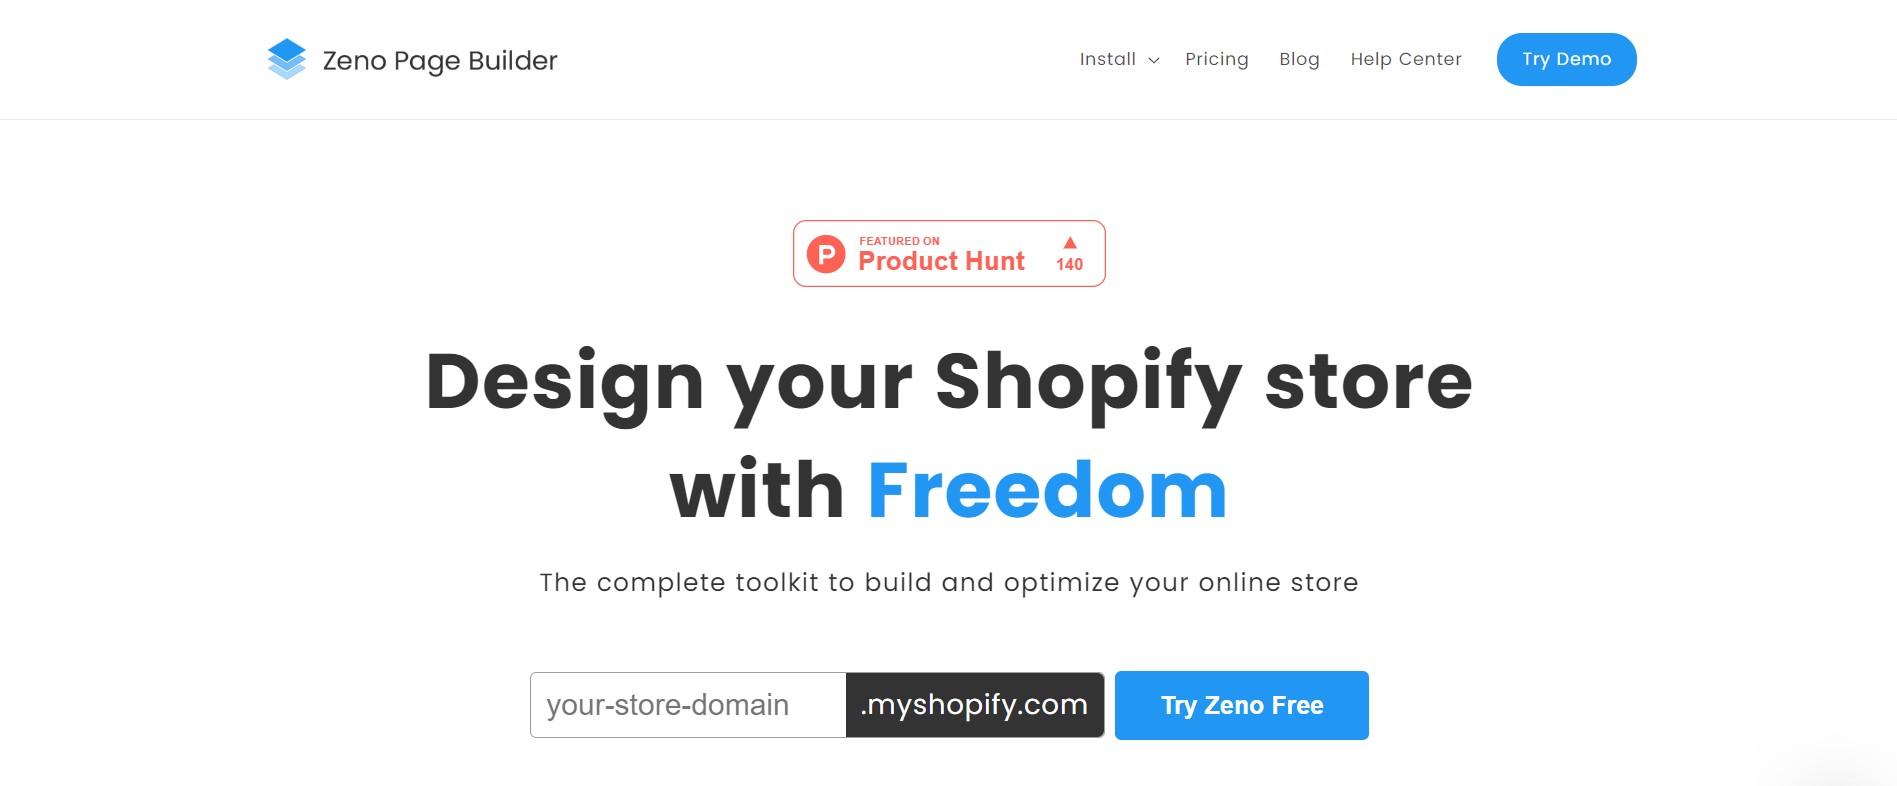 Best Shopify Page Builder Apps: Zeno